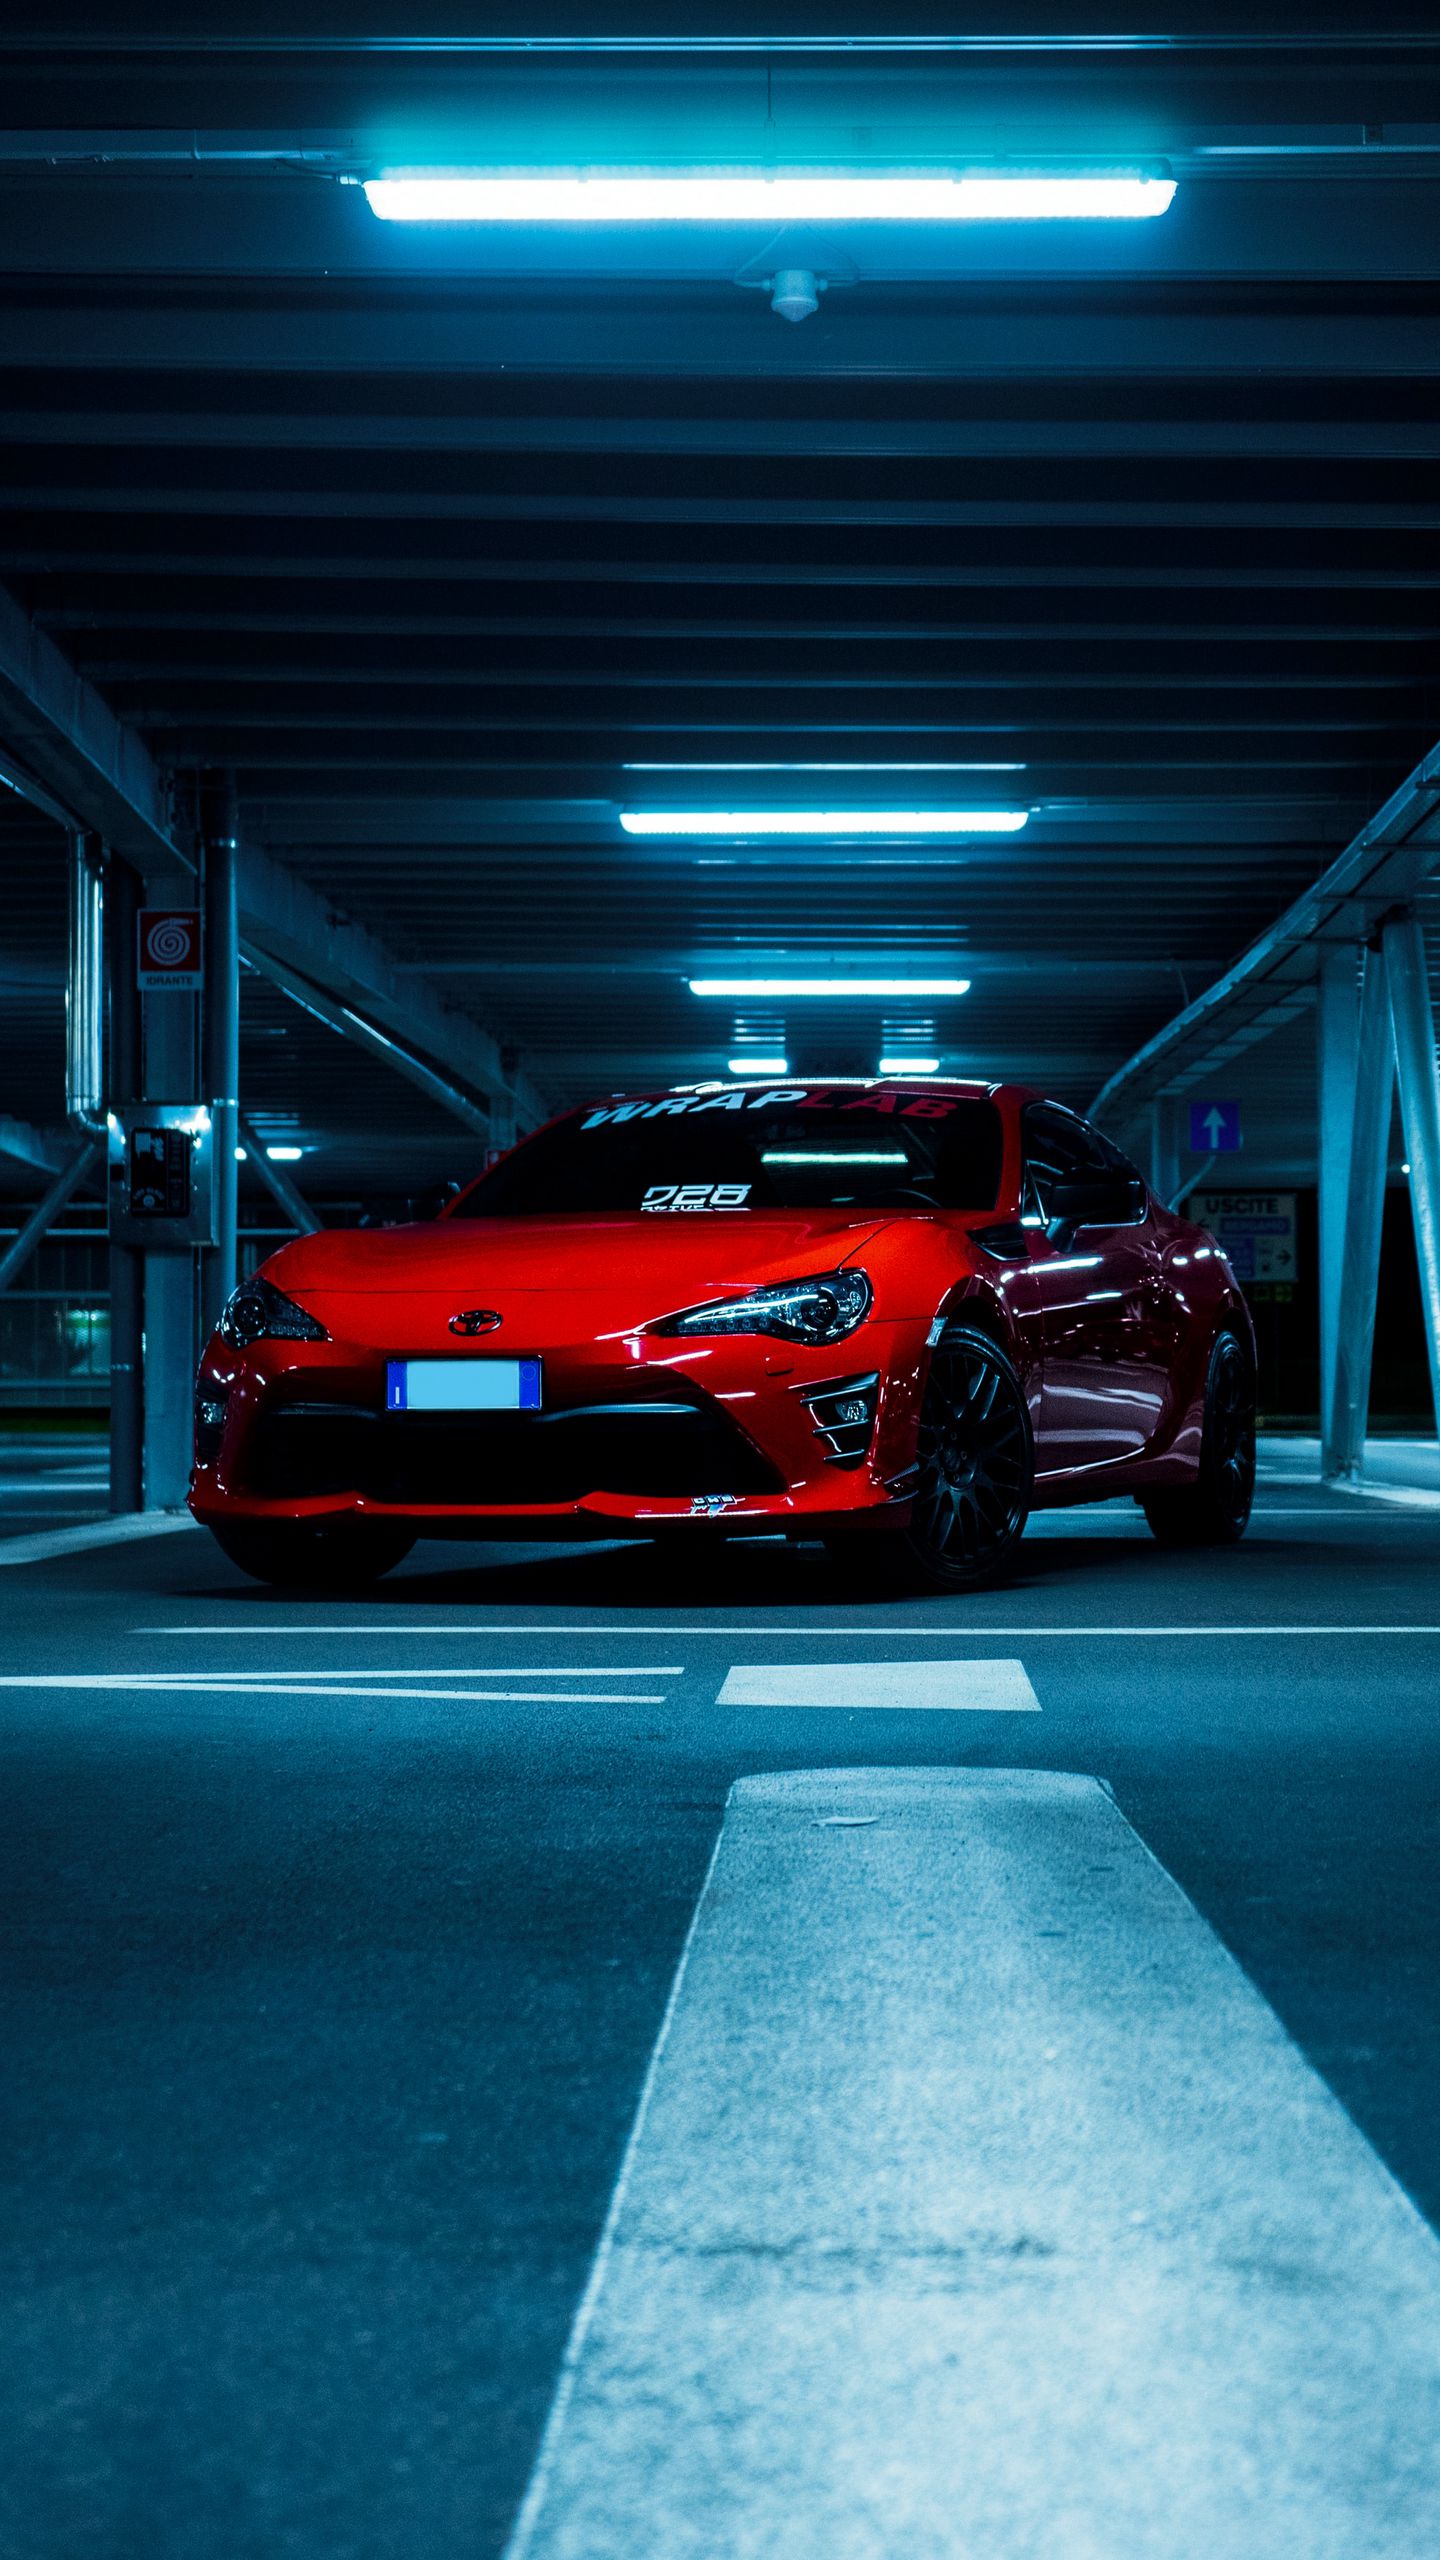 Download wallpaper 1440x2560 toyota, car, sports car, front view, red qhd  samsung galaxy s6, s7, edge, note, lg g4 hd background